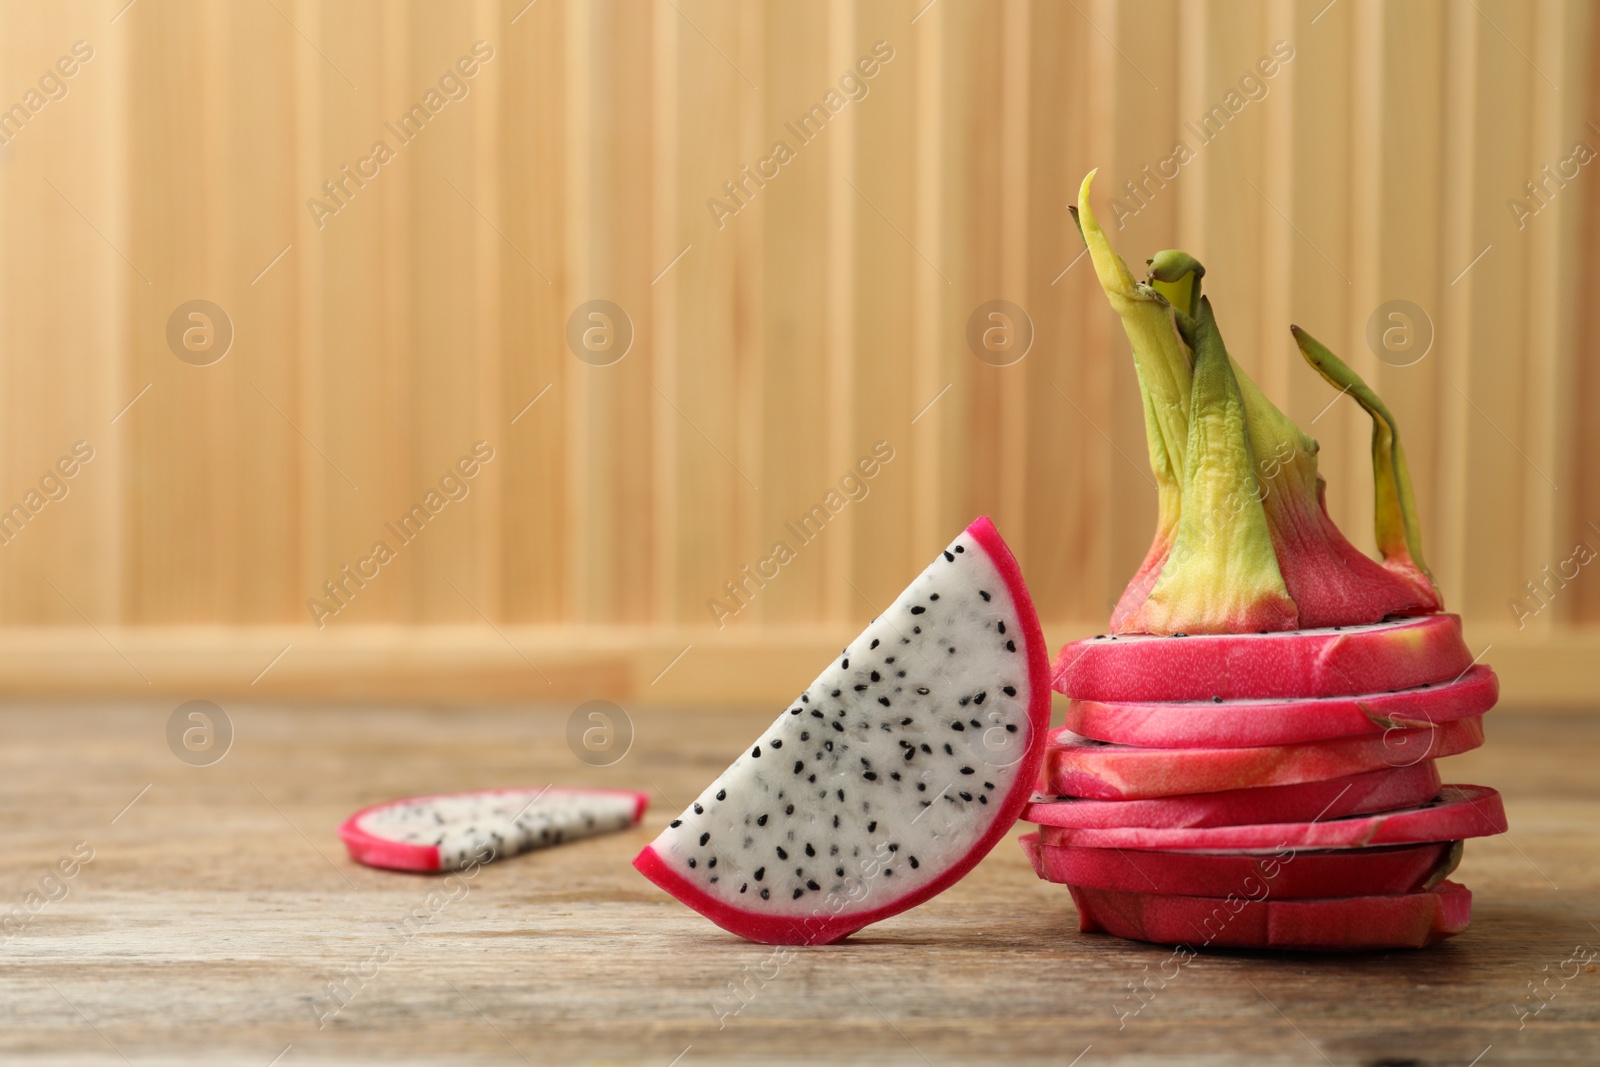 Photo of Slices of delicious dragon fruit (pitahaya) on wooden table. Space for text